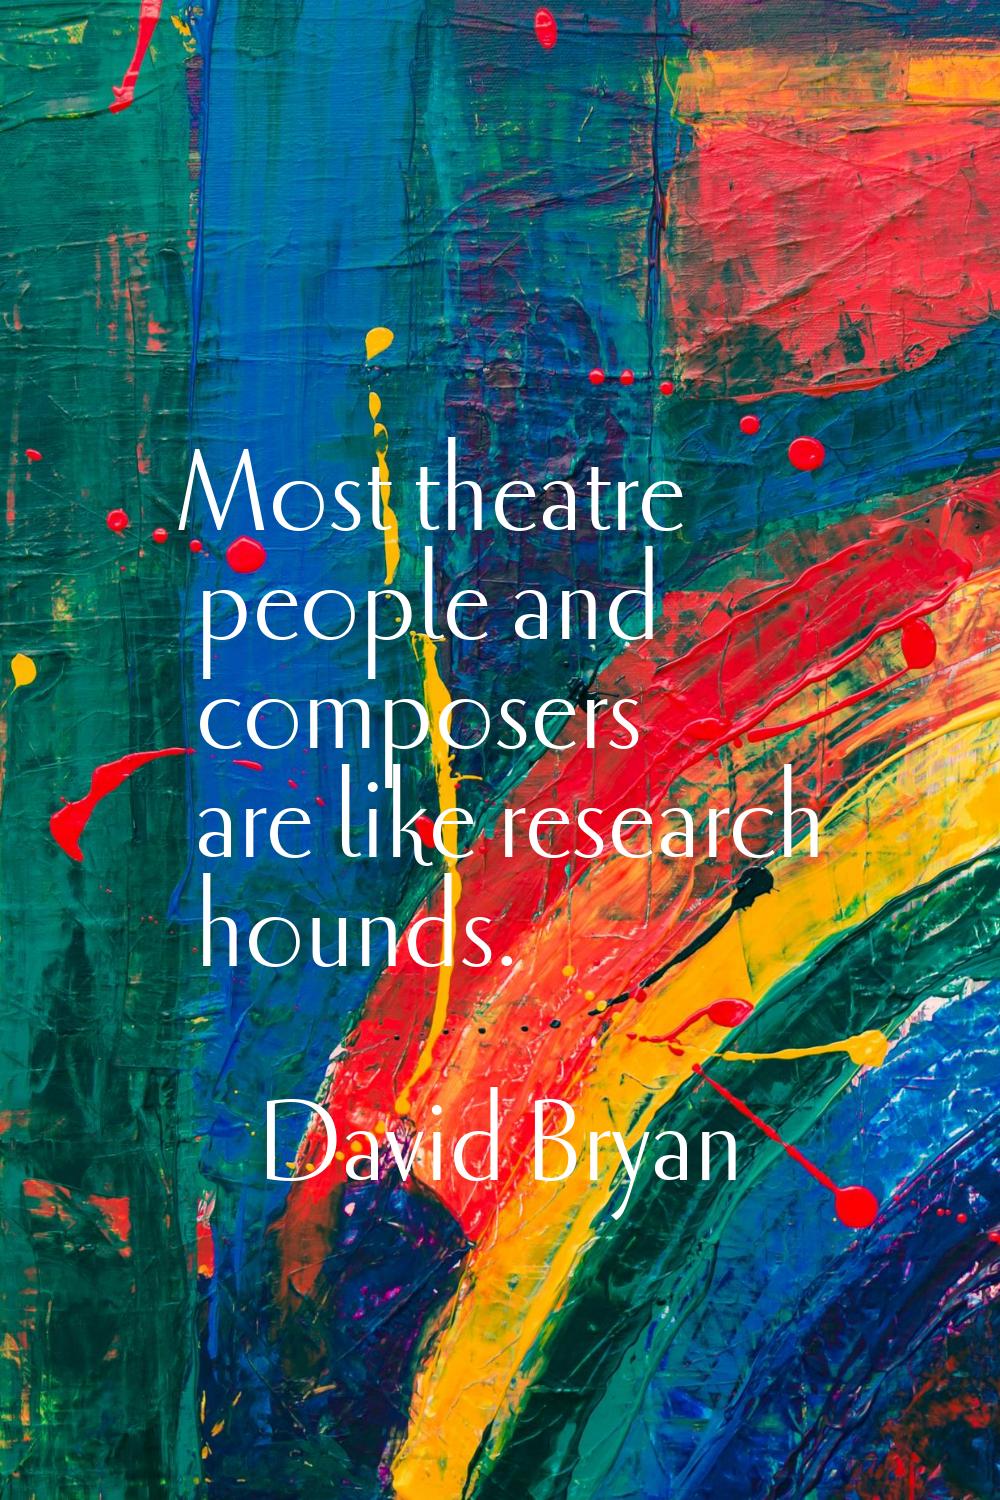 Most theatre people and composers are like research hounds.